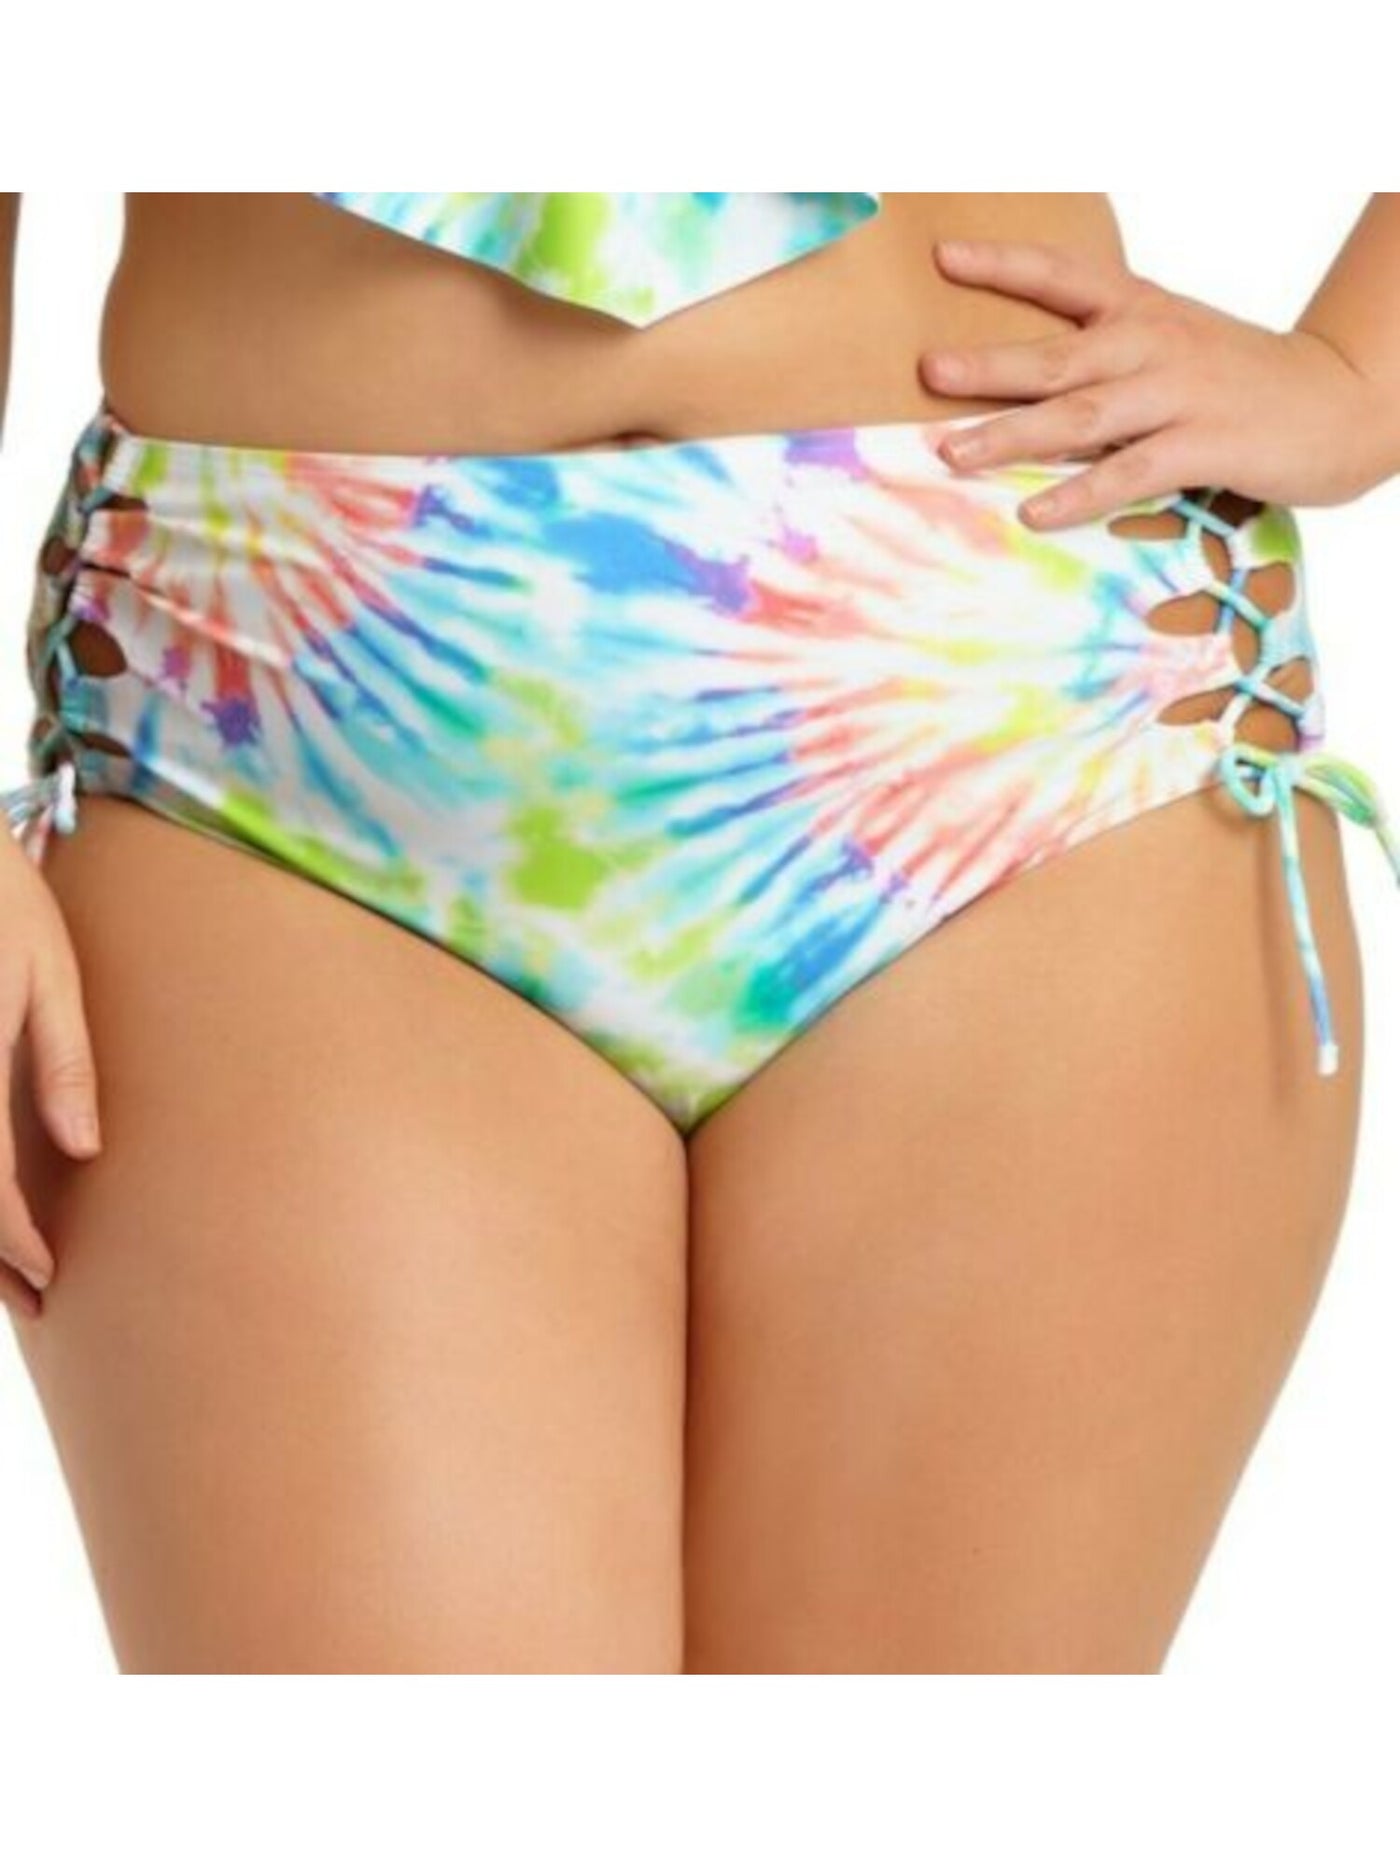 CALIFORNIA SUNSHINE Women's White Tie Dye Stretch Lace-Up Sides Lined Moderate Coverage High Waisted Swimsuit Bottom 3X